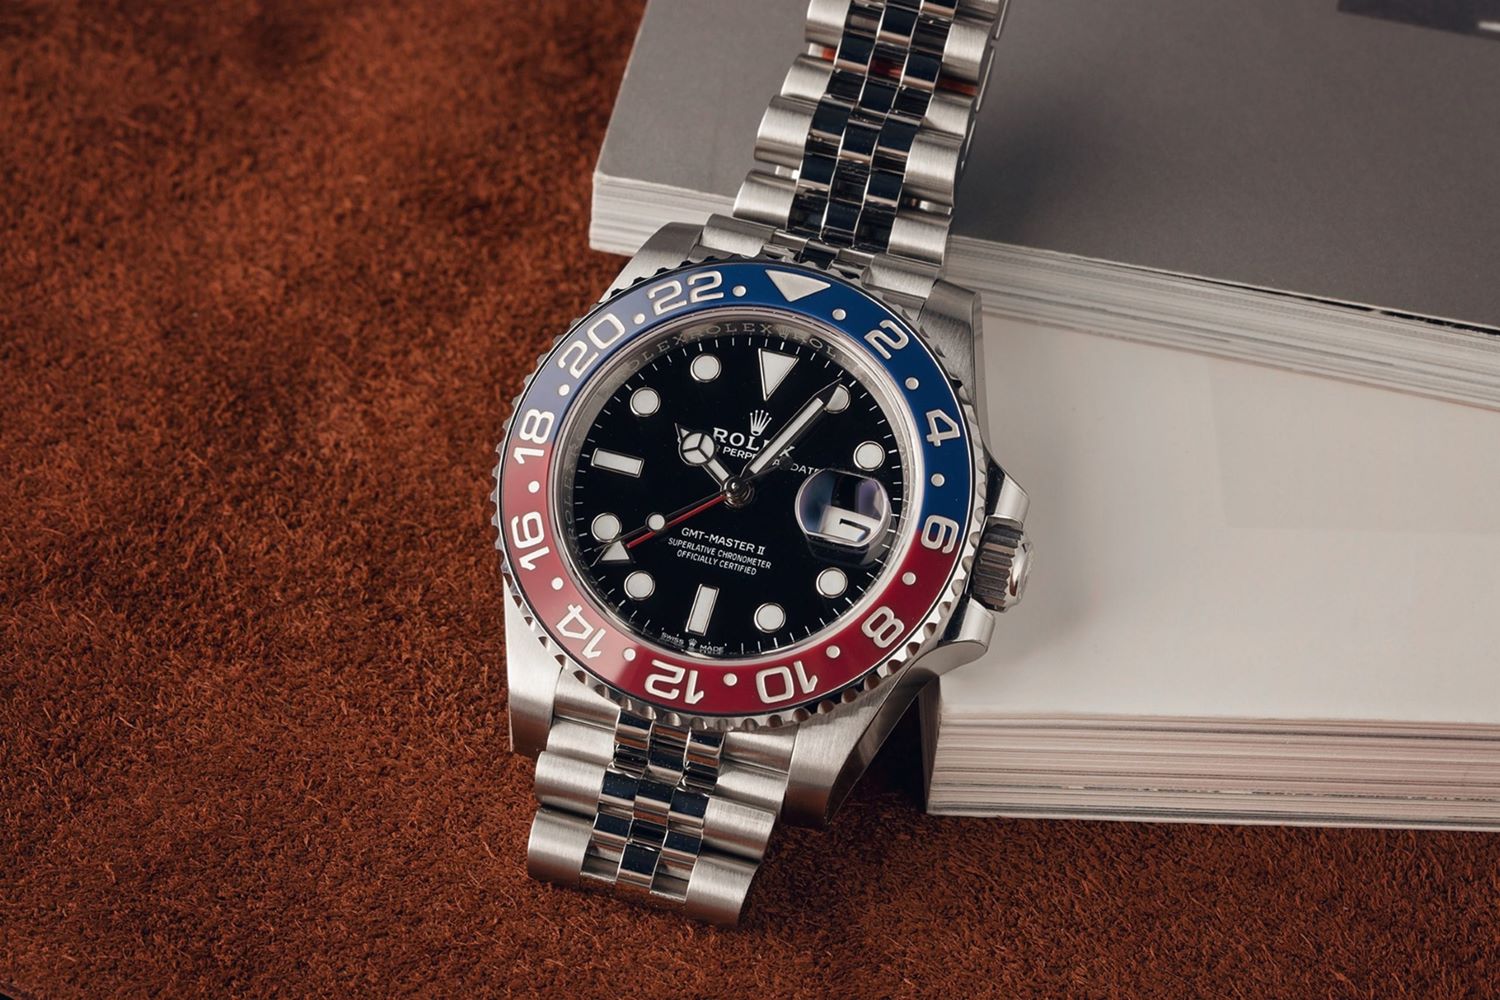 How To Sell A Rolex Watch Without Papers